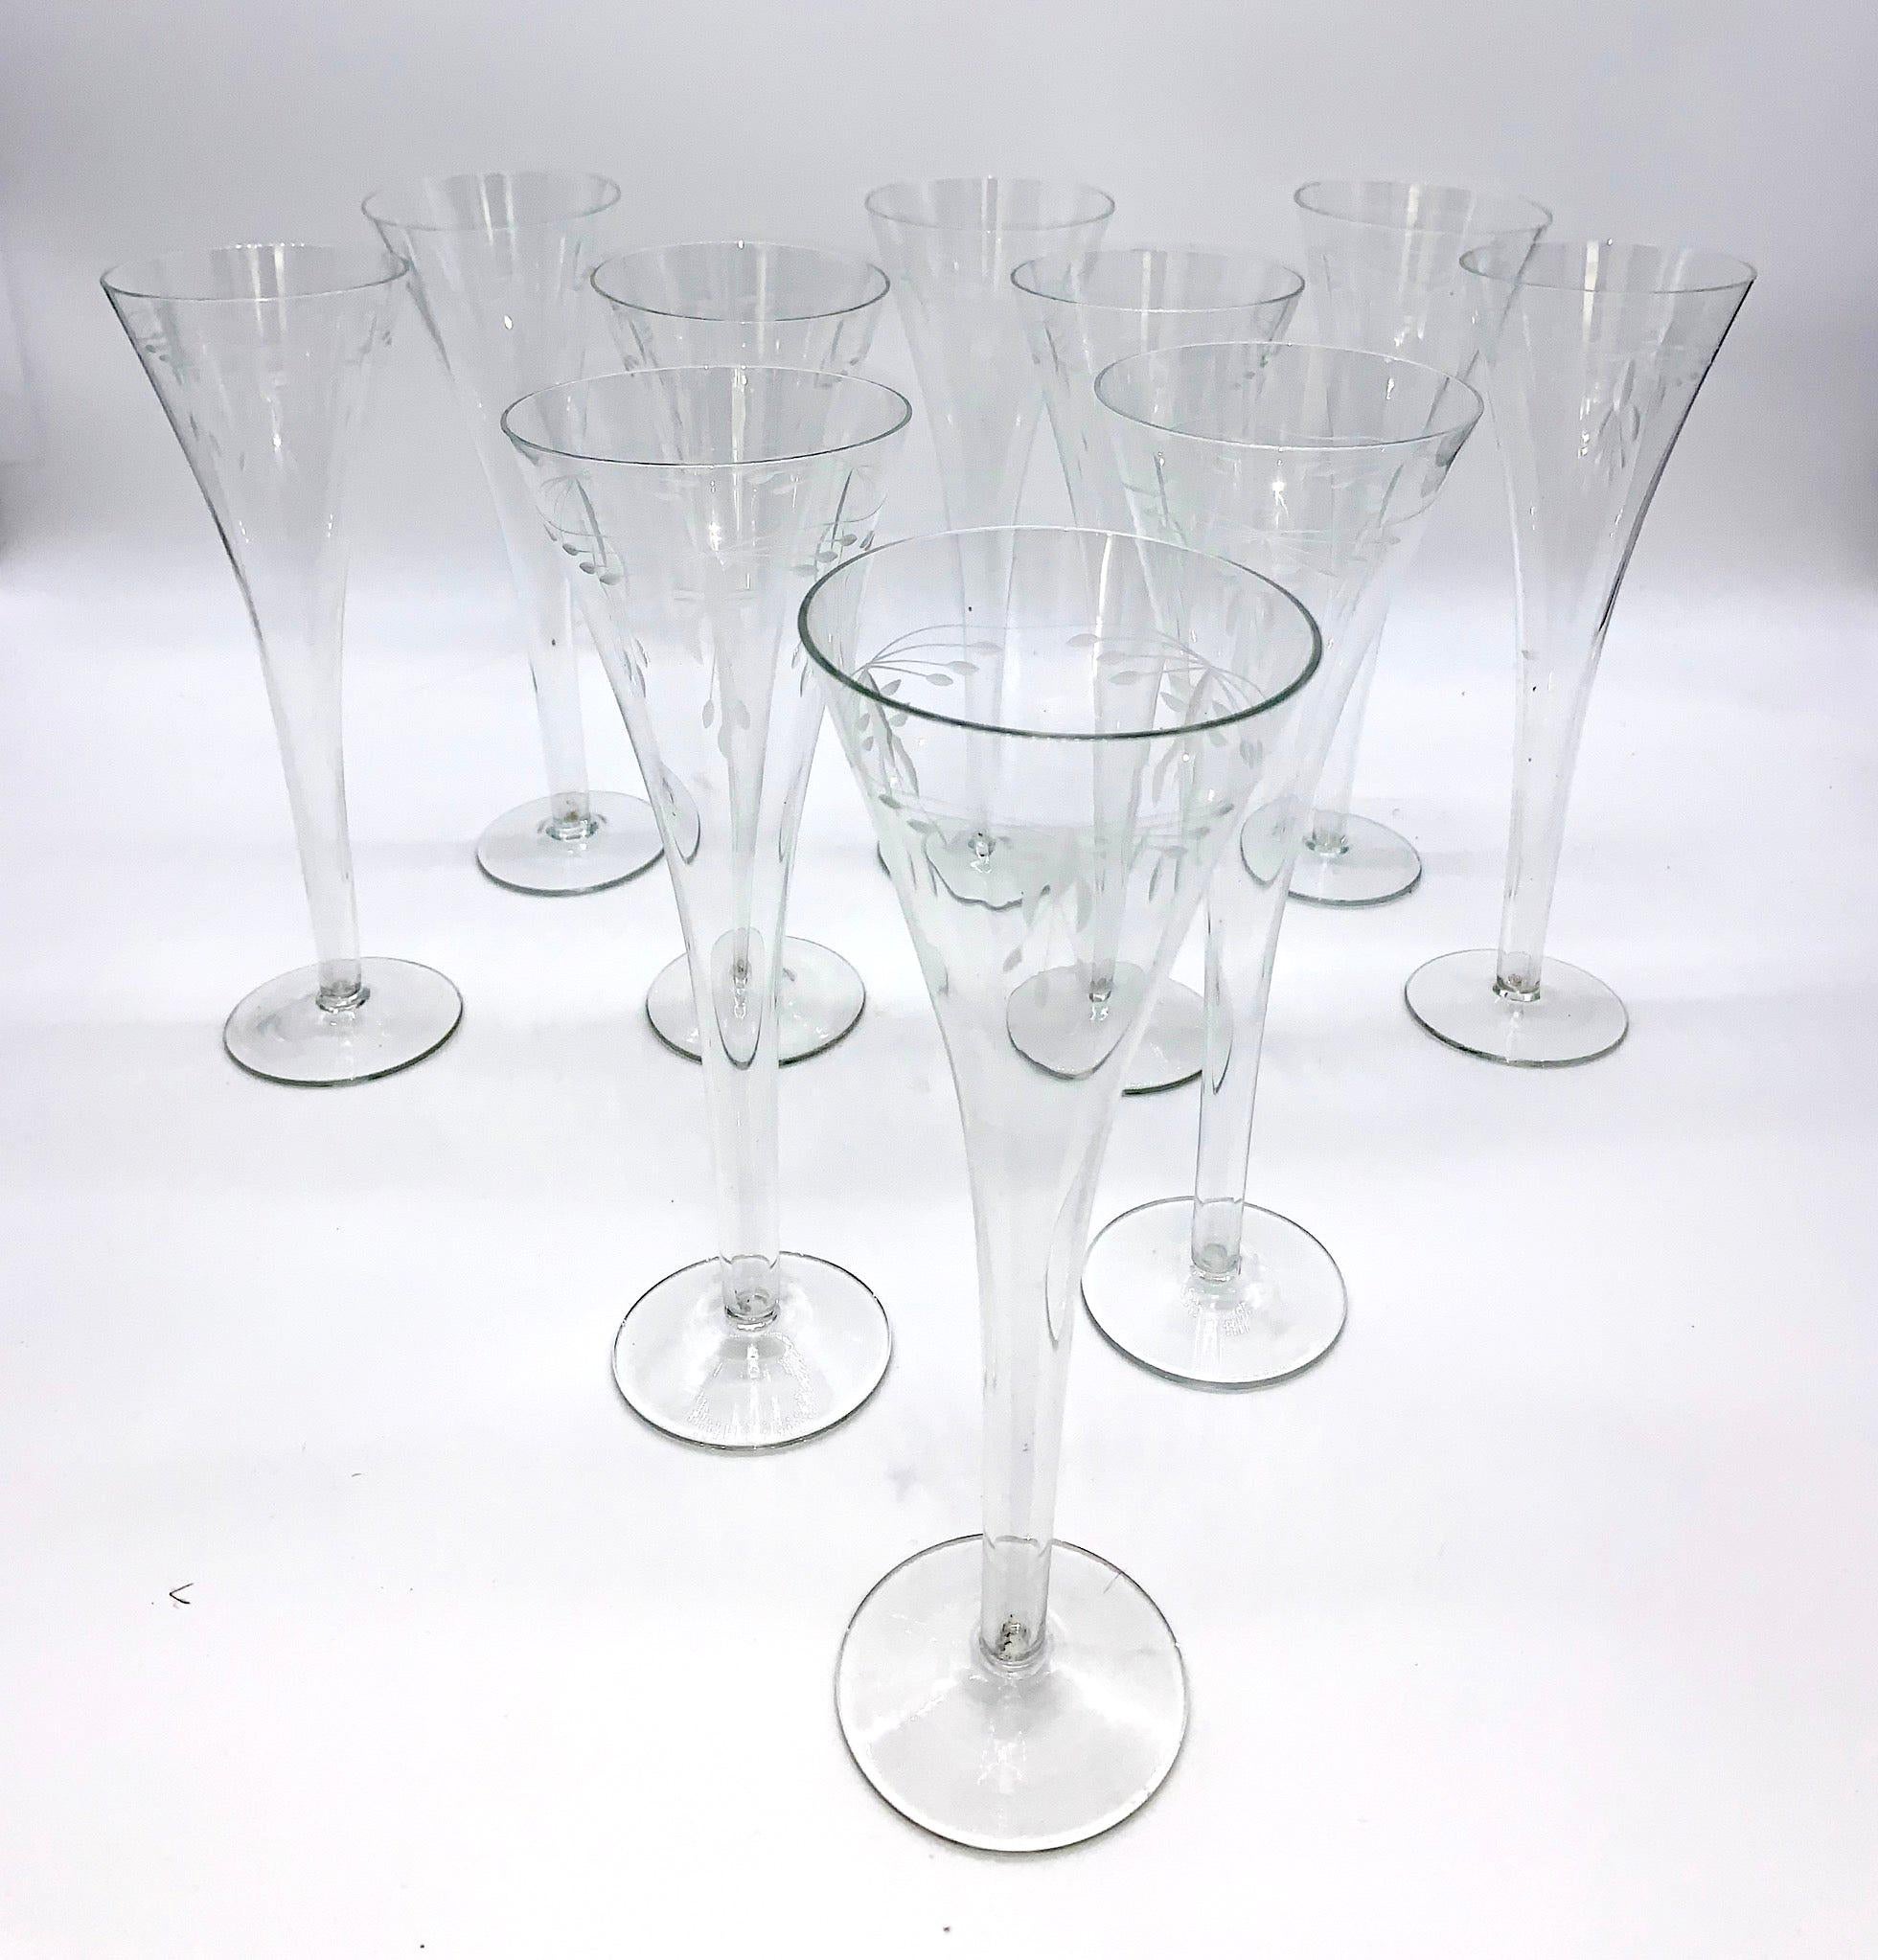 1900-1920 Art Nouveau Crystal Glasses Hand Blown with Engraved Flowers For Sale 1